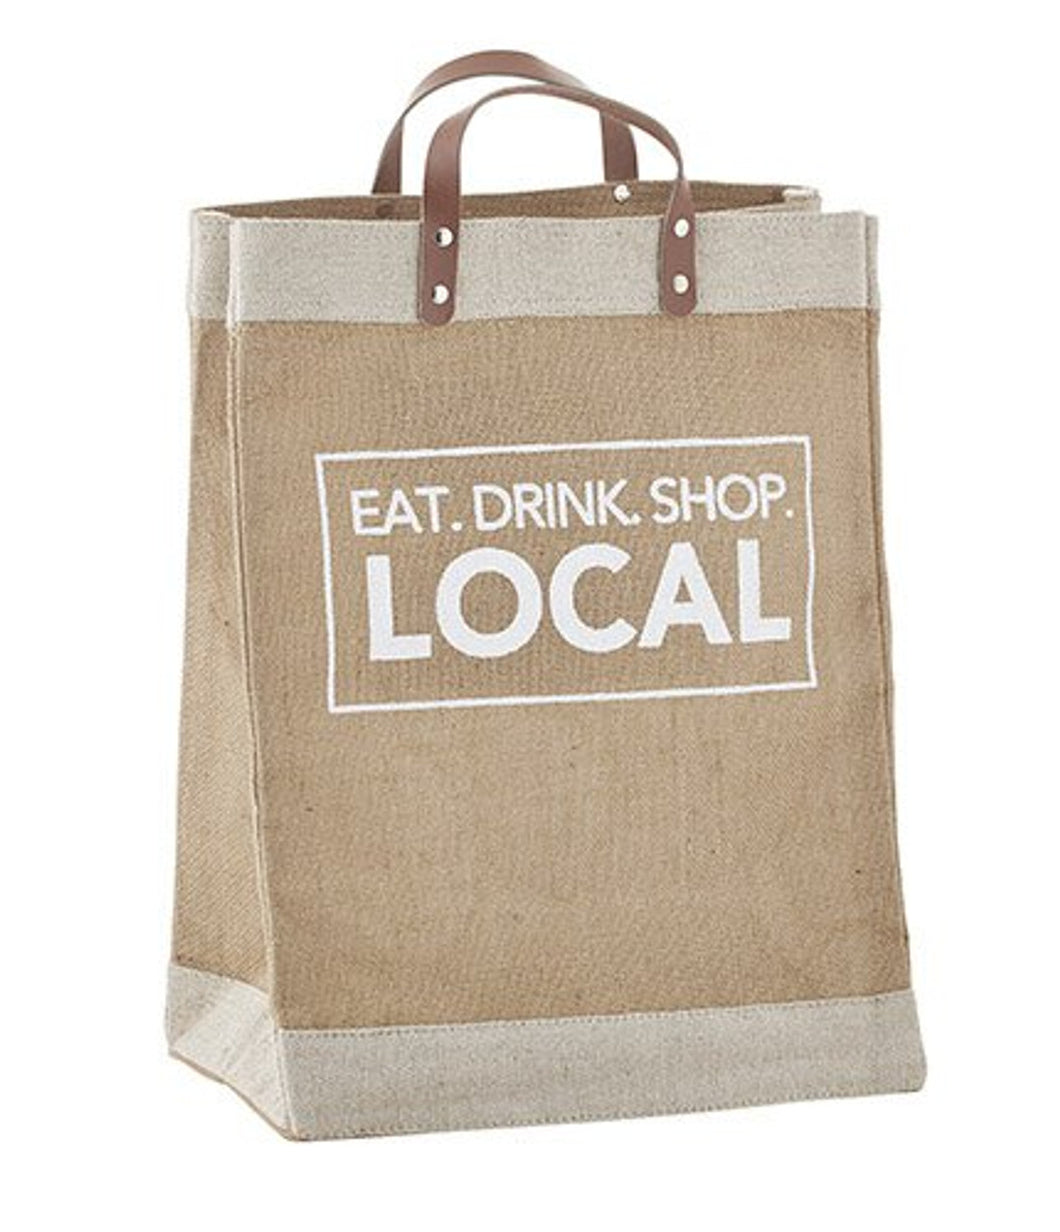 Eat Drink Shop Local Market Tote